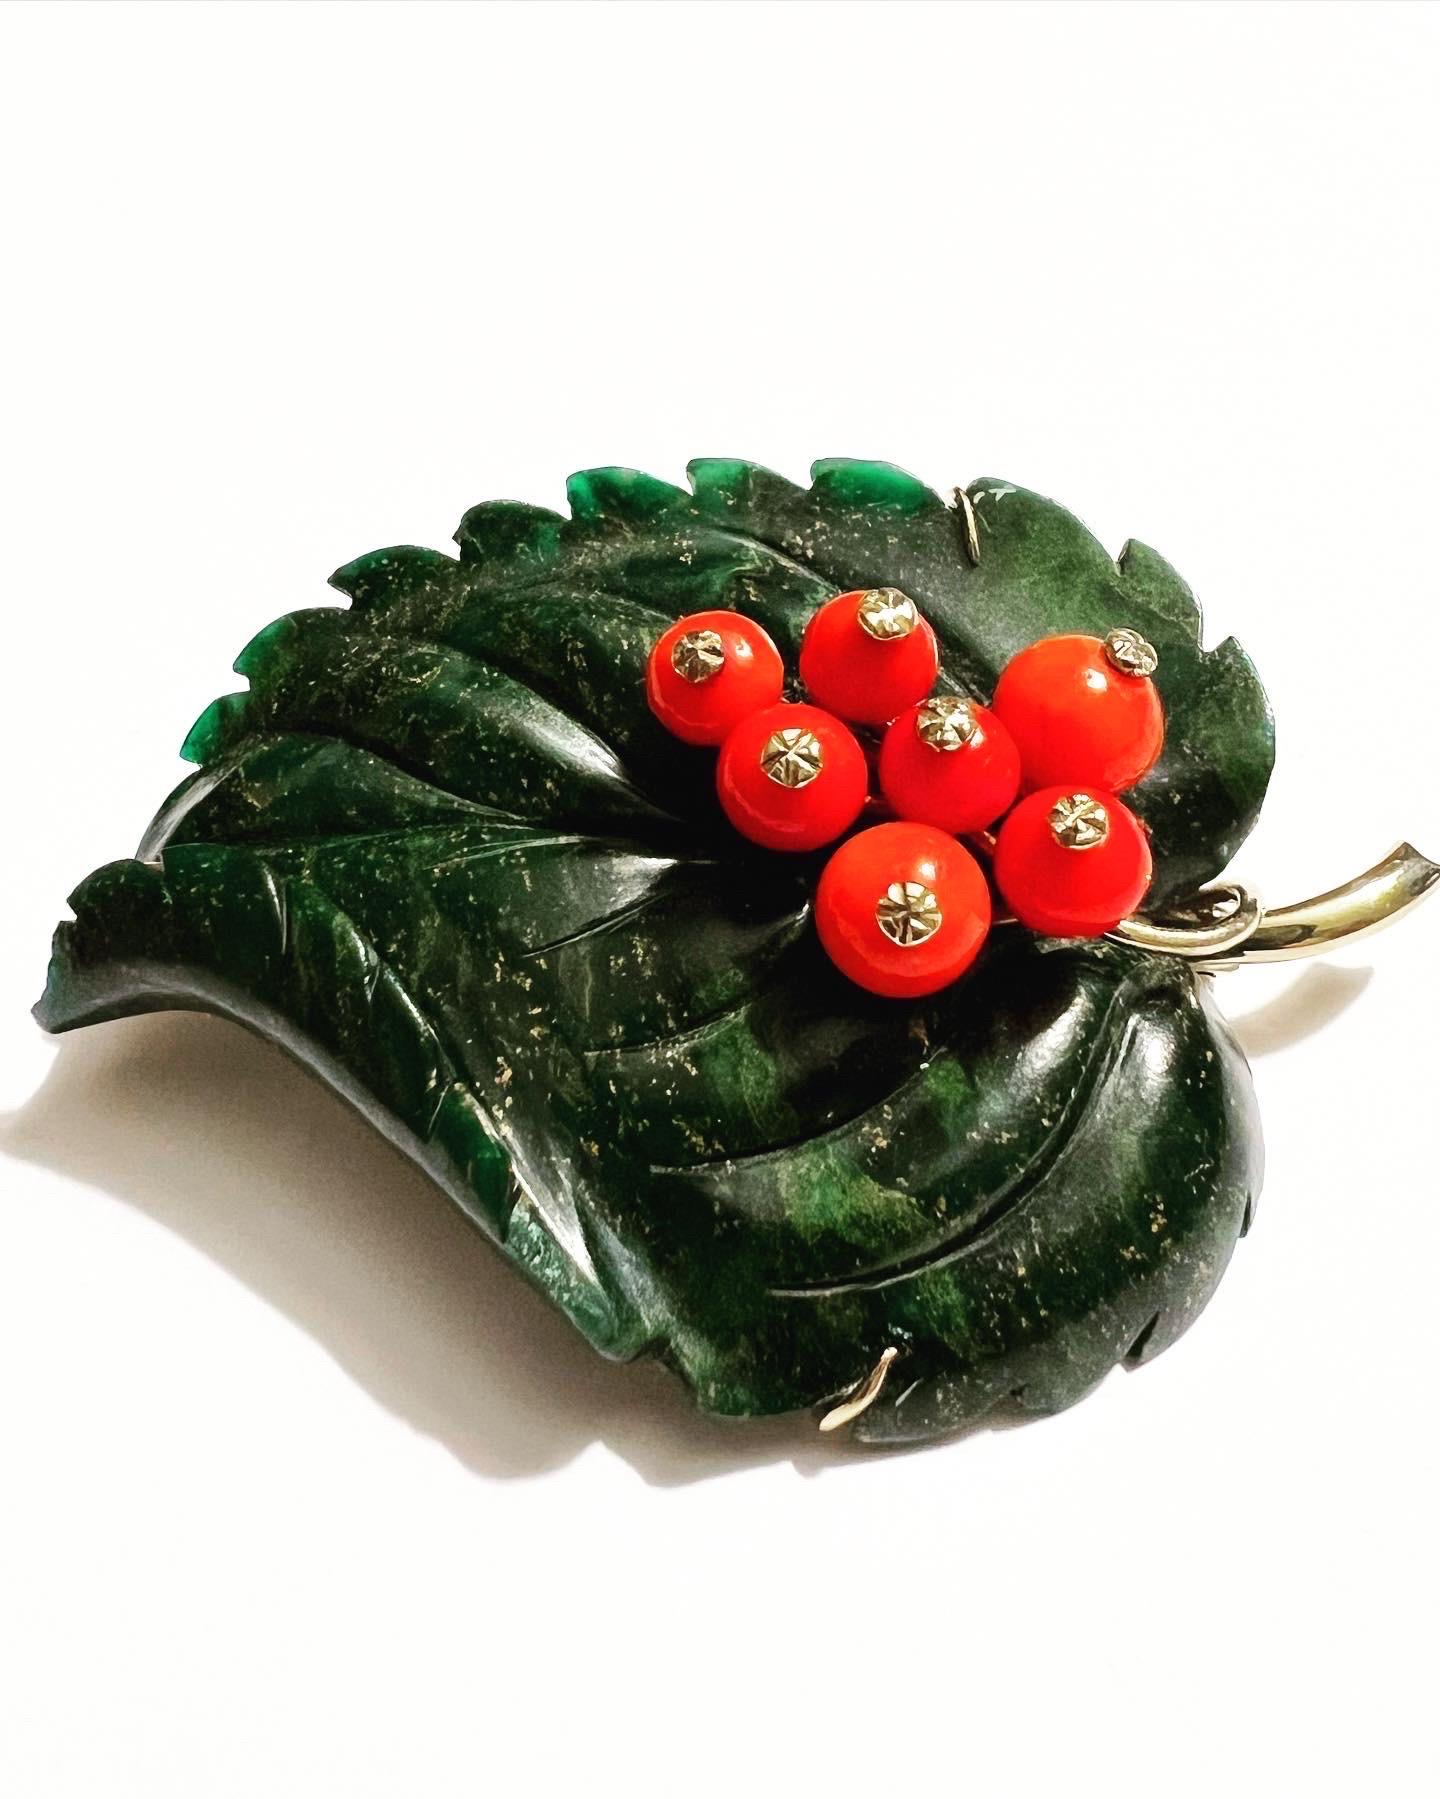 Made in Vienna, Austria in the 1950s.  
The brooch is finely modeled as a beautiful leaf.
The green leaf is naturalistically carved from a single piece of nephrite jade and as fruits there are coral spheres.
The structure is made of 14K gold. 